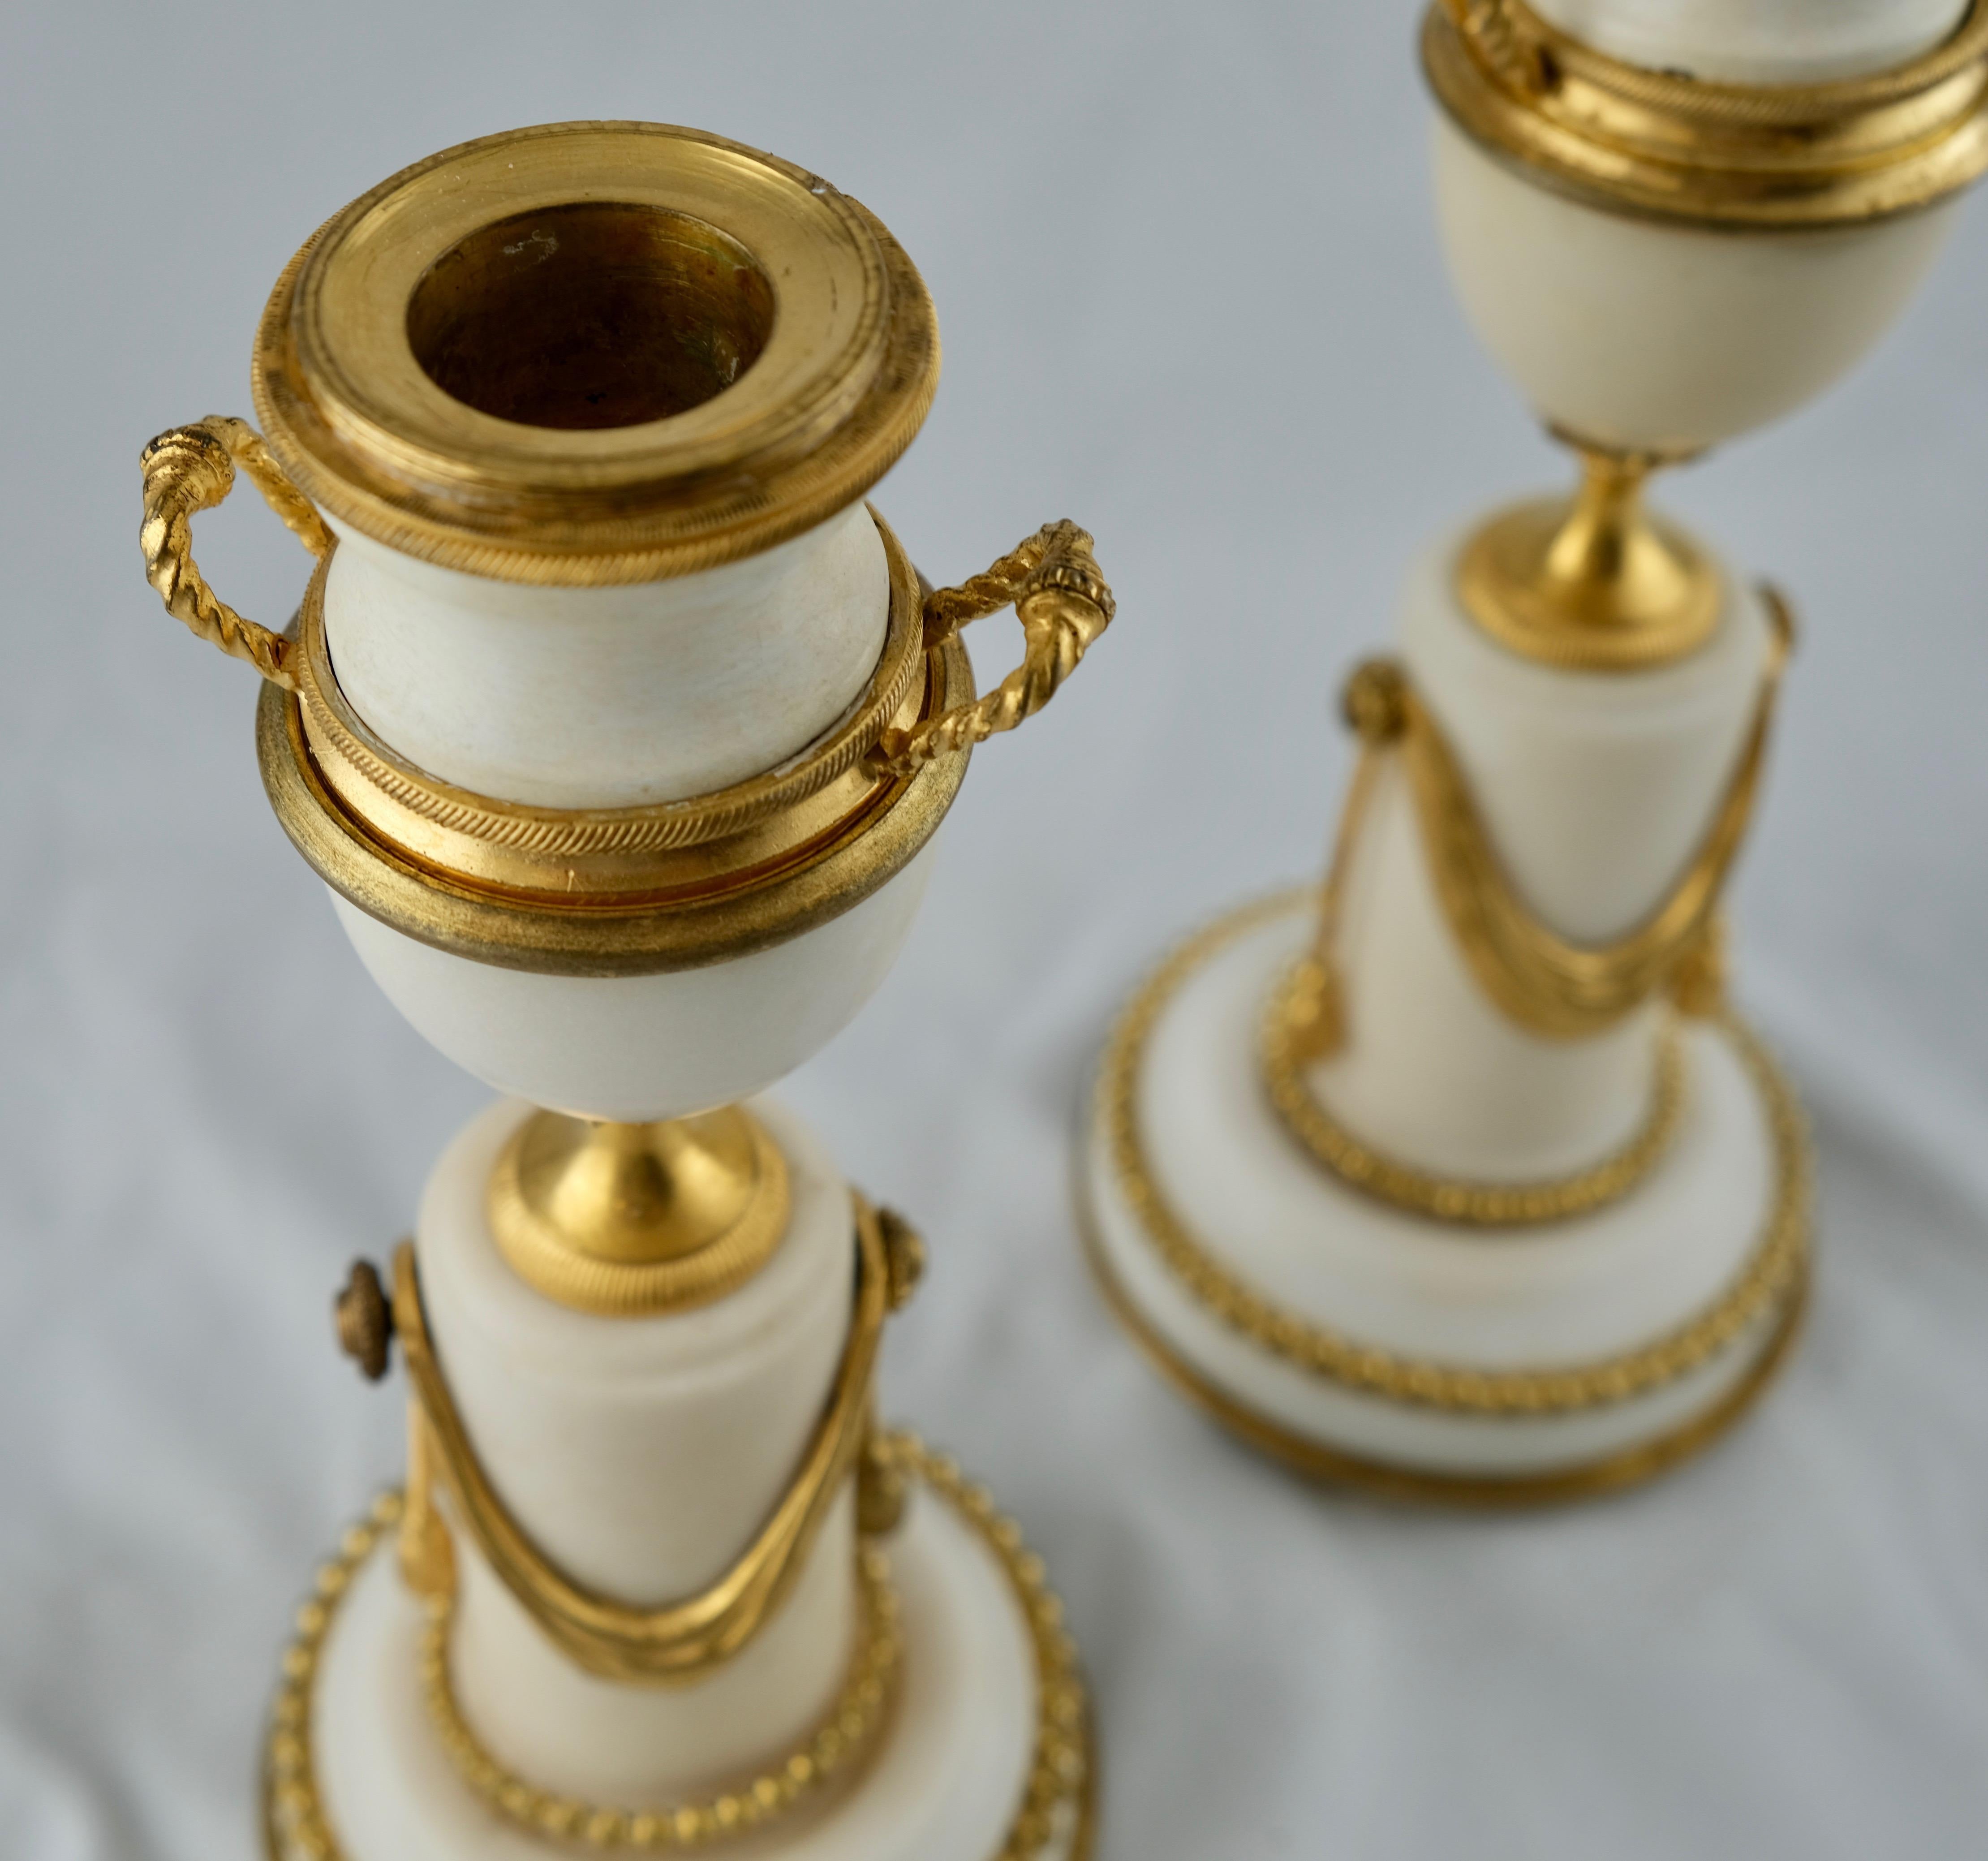 A pair of French casolettes, made of marble and gilt bronze. The tops can be screwed of so that they can either be used as candlesticks or decorative objects depicting a urn on a pillar.
Good quality on the casting and gilding.